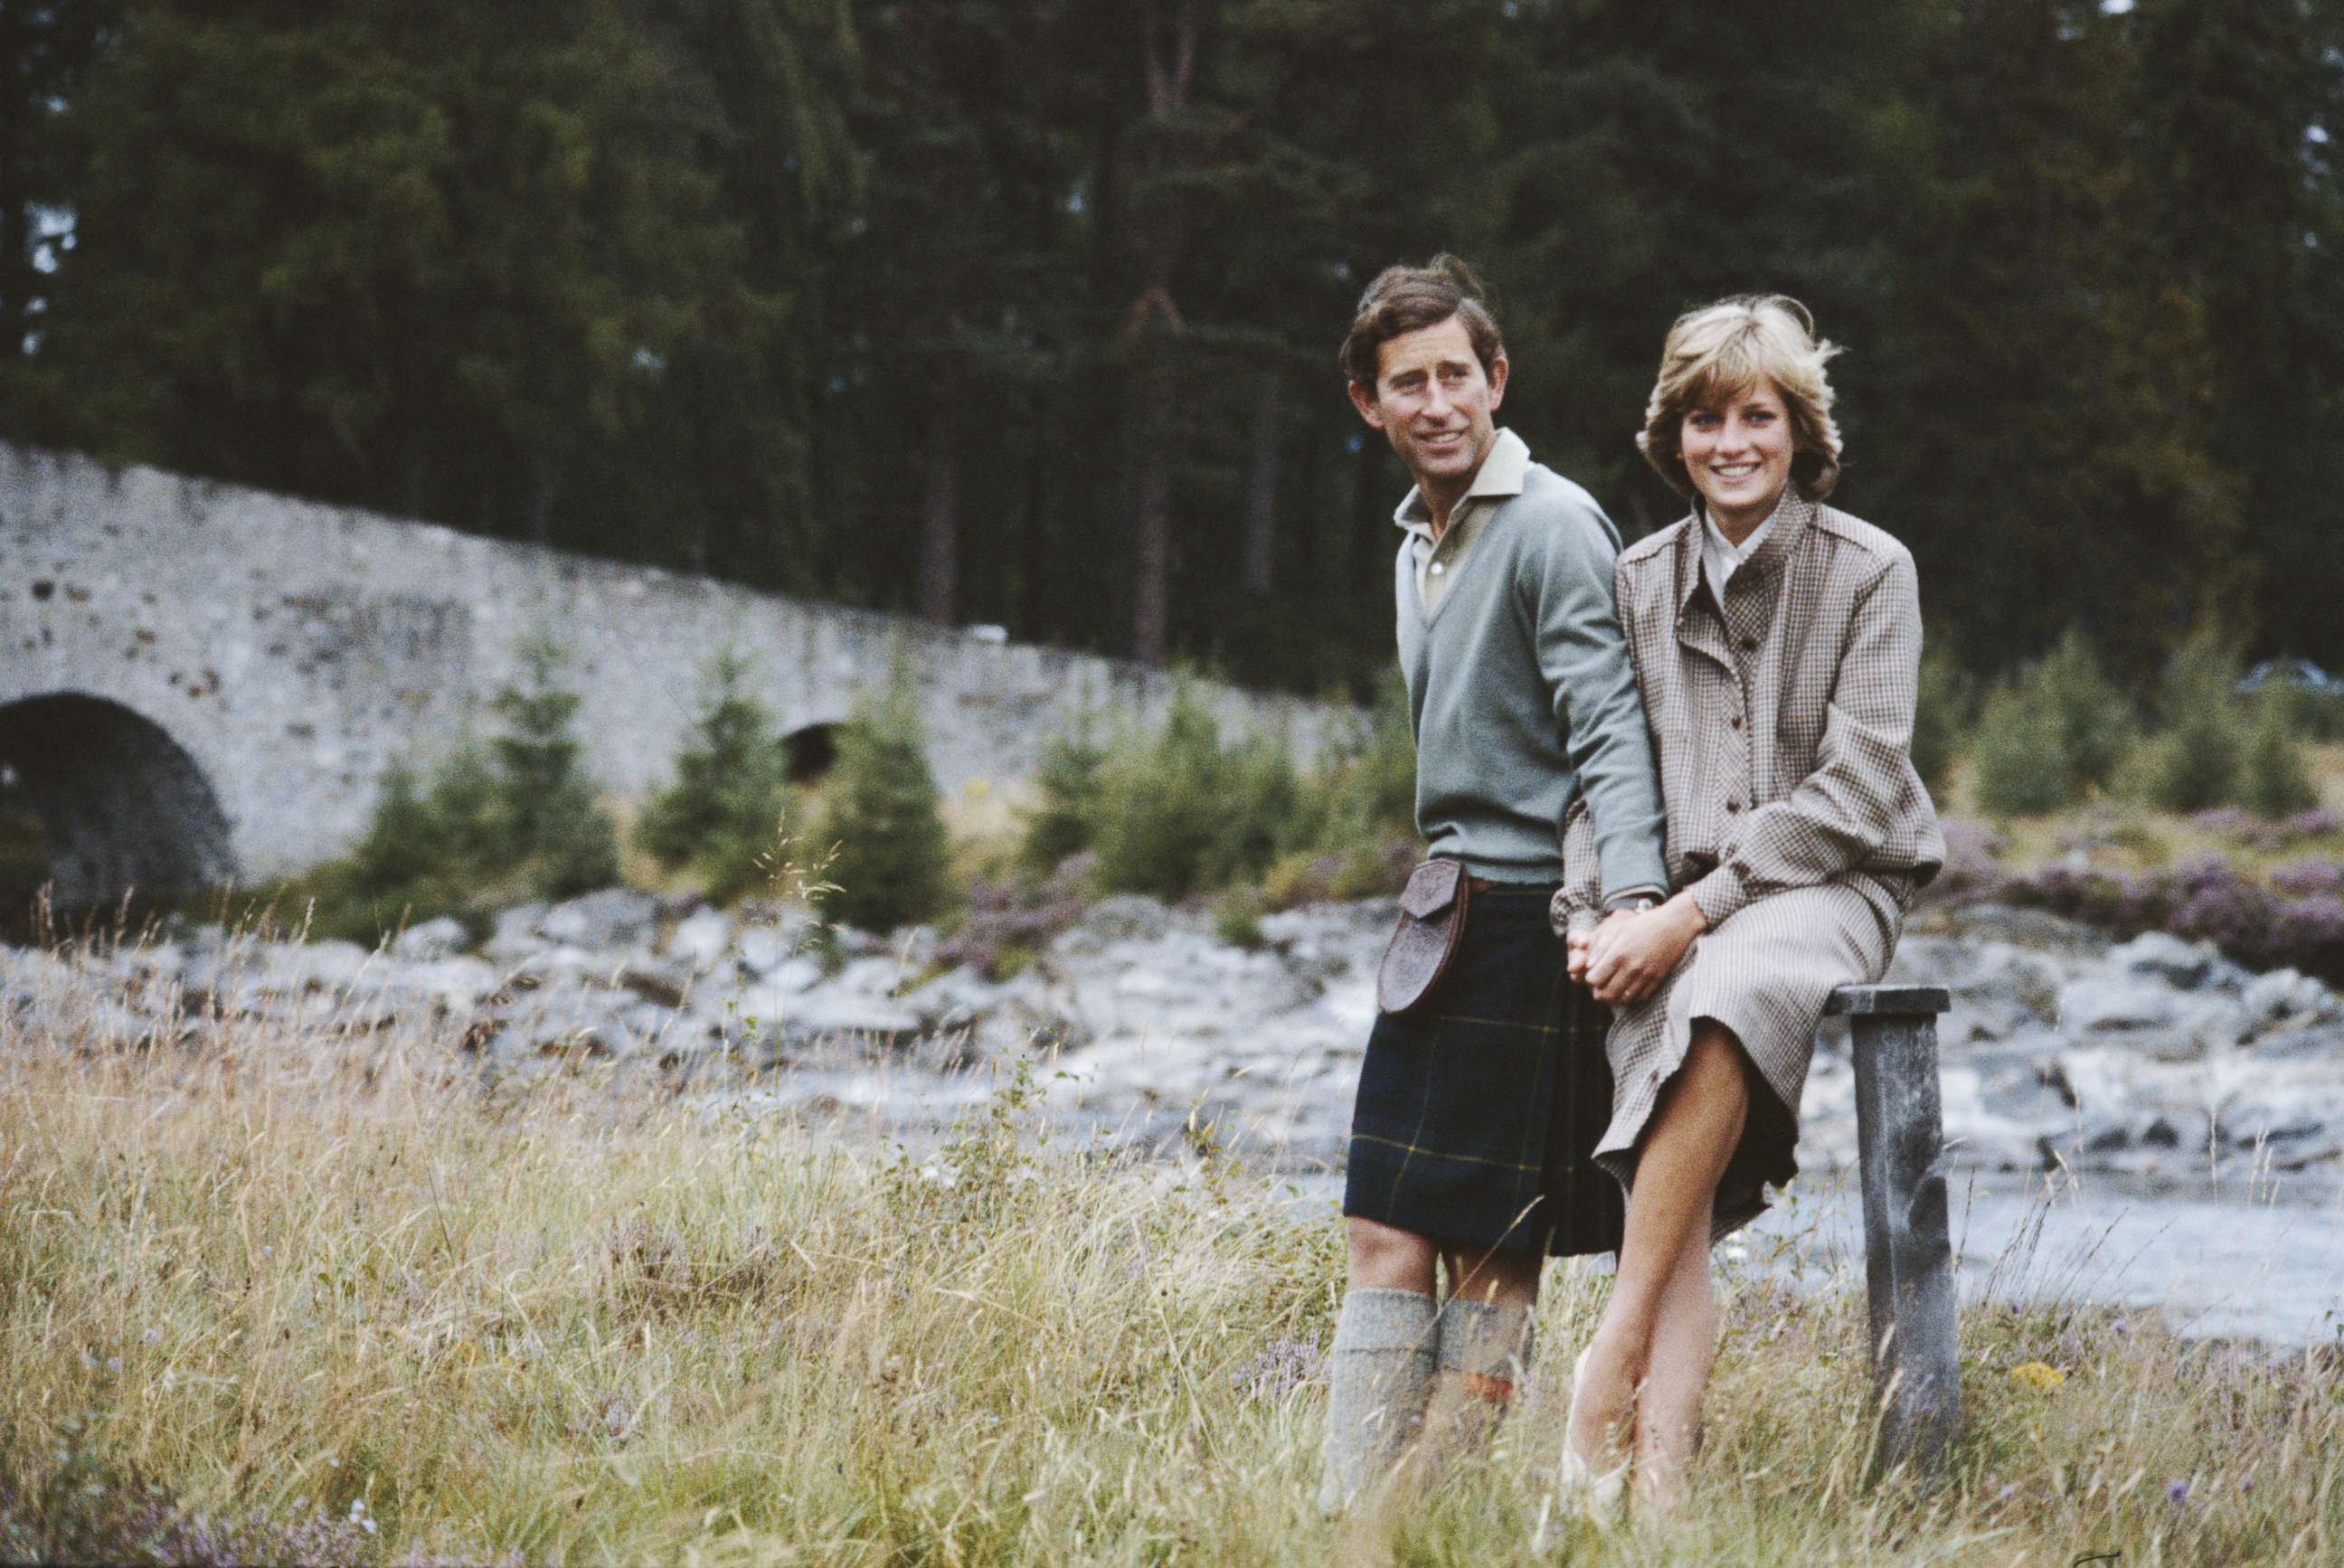 PHOTO: Prince Charles and Diana, Princess of Wales pose together during their honeymoon in Balmoral, Scotland, August 19, 1981. 